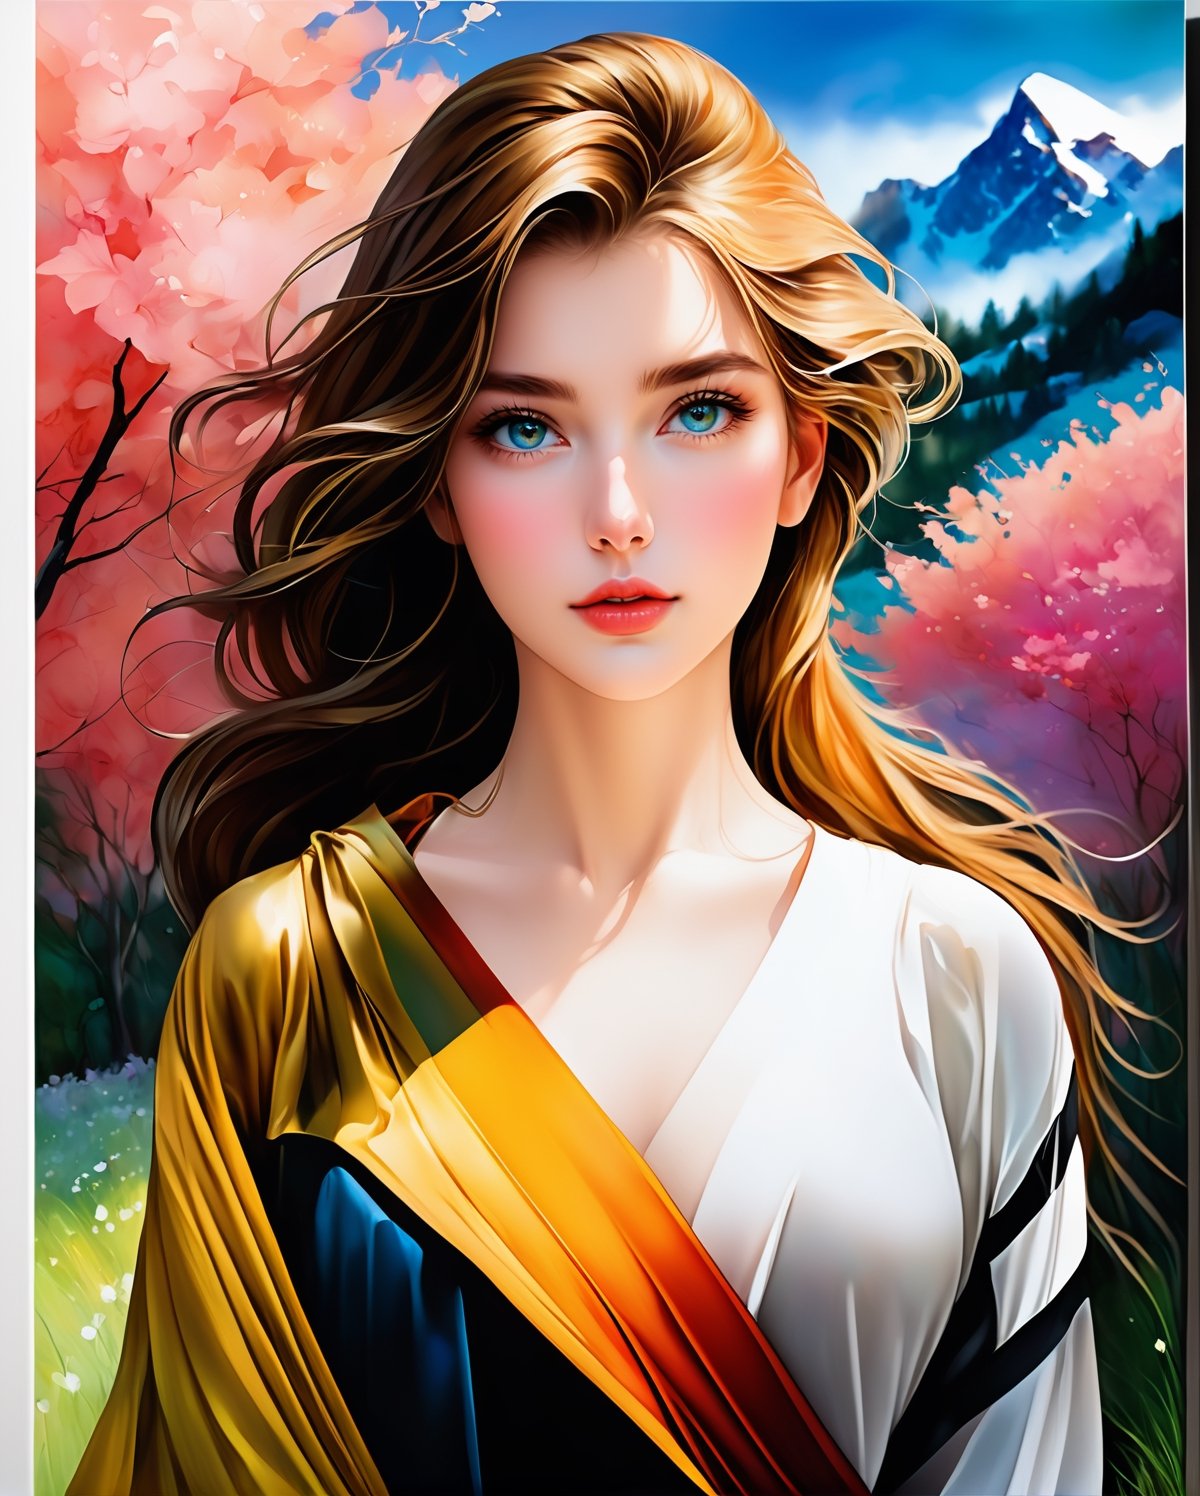 A captivating, hyperrealistic digital painting of a stunningly beautiful girl, featuring a delicate and perfect face with reflective eyes that seem to gleam. The artwork masterfully combines the styles of Arthur Rackham and Antoine Blanchard, resulting in a vibrant and colorful masterpiece. The background features a lush landscape with a mix of bright and vibrant colors, creating a dynamic and eye-catching scene. The center of the image is the girl, with a sharp focus on her face, revealing the incredible level of detail and smoothness in the painting. This hyperrealistic illustration is a stunning work of art, perfected to 8k resolution., illustration, conceptual art